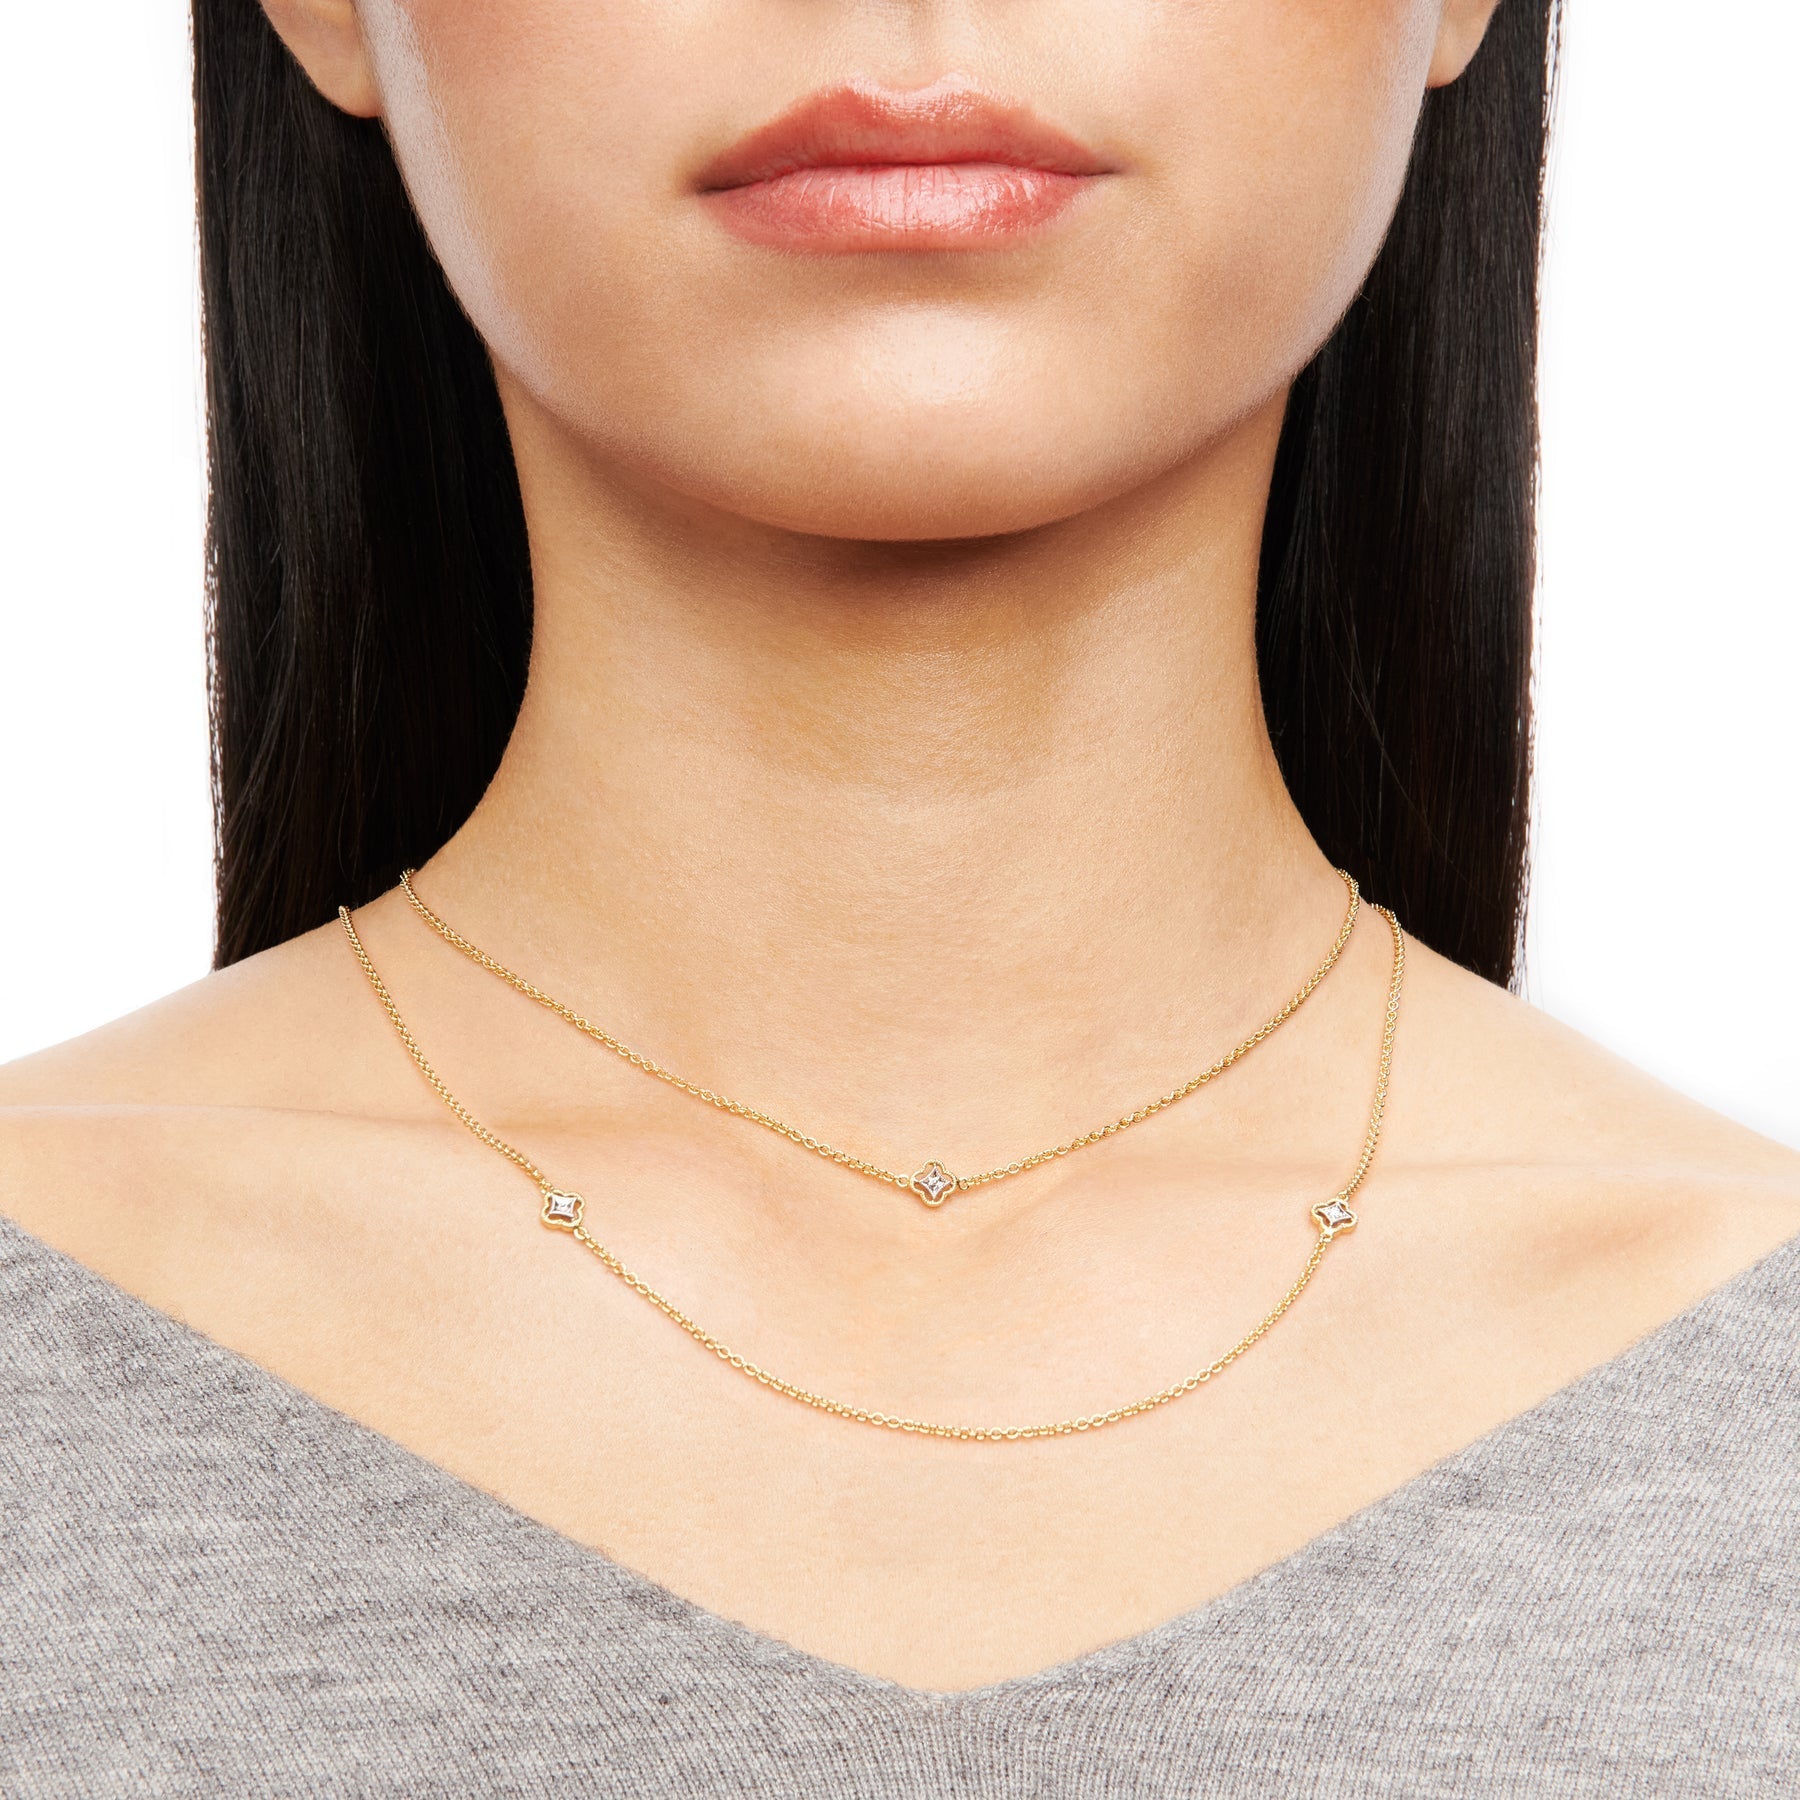 Trellis Necklace in 18k Gold with Diamonds CH114